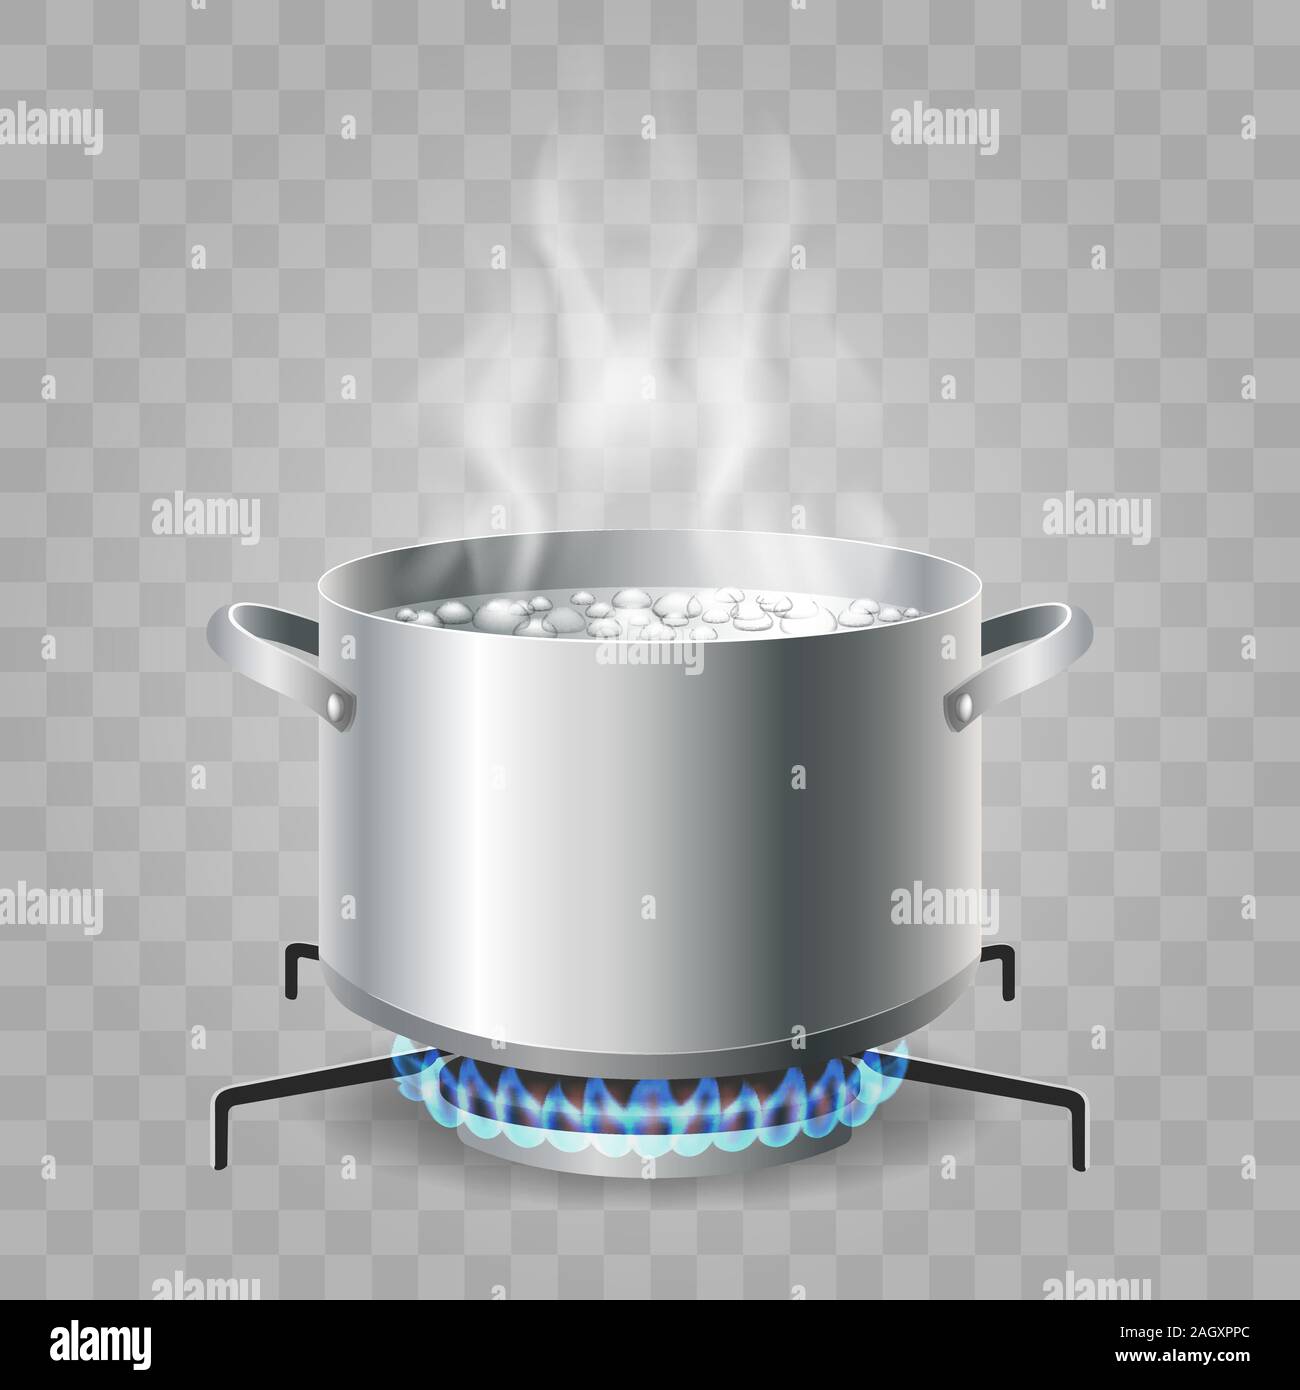 https://c8.alamy.com/comp/2AGXPPC/cooking-boiling-water-2AGXPPC.jpg